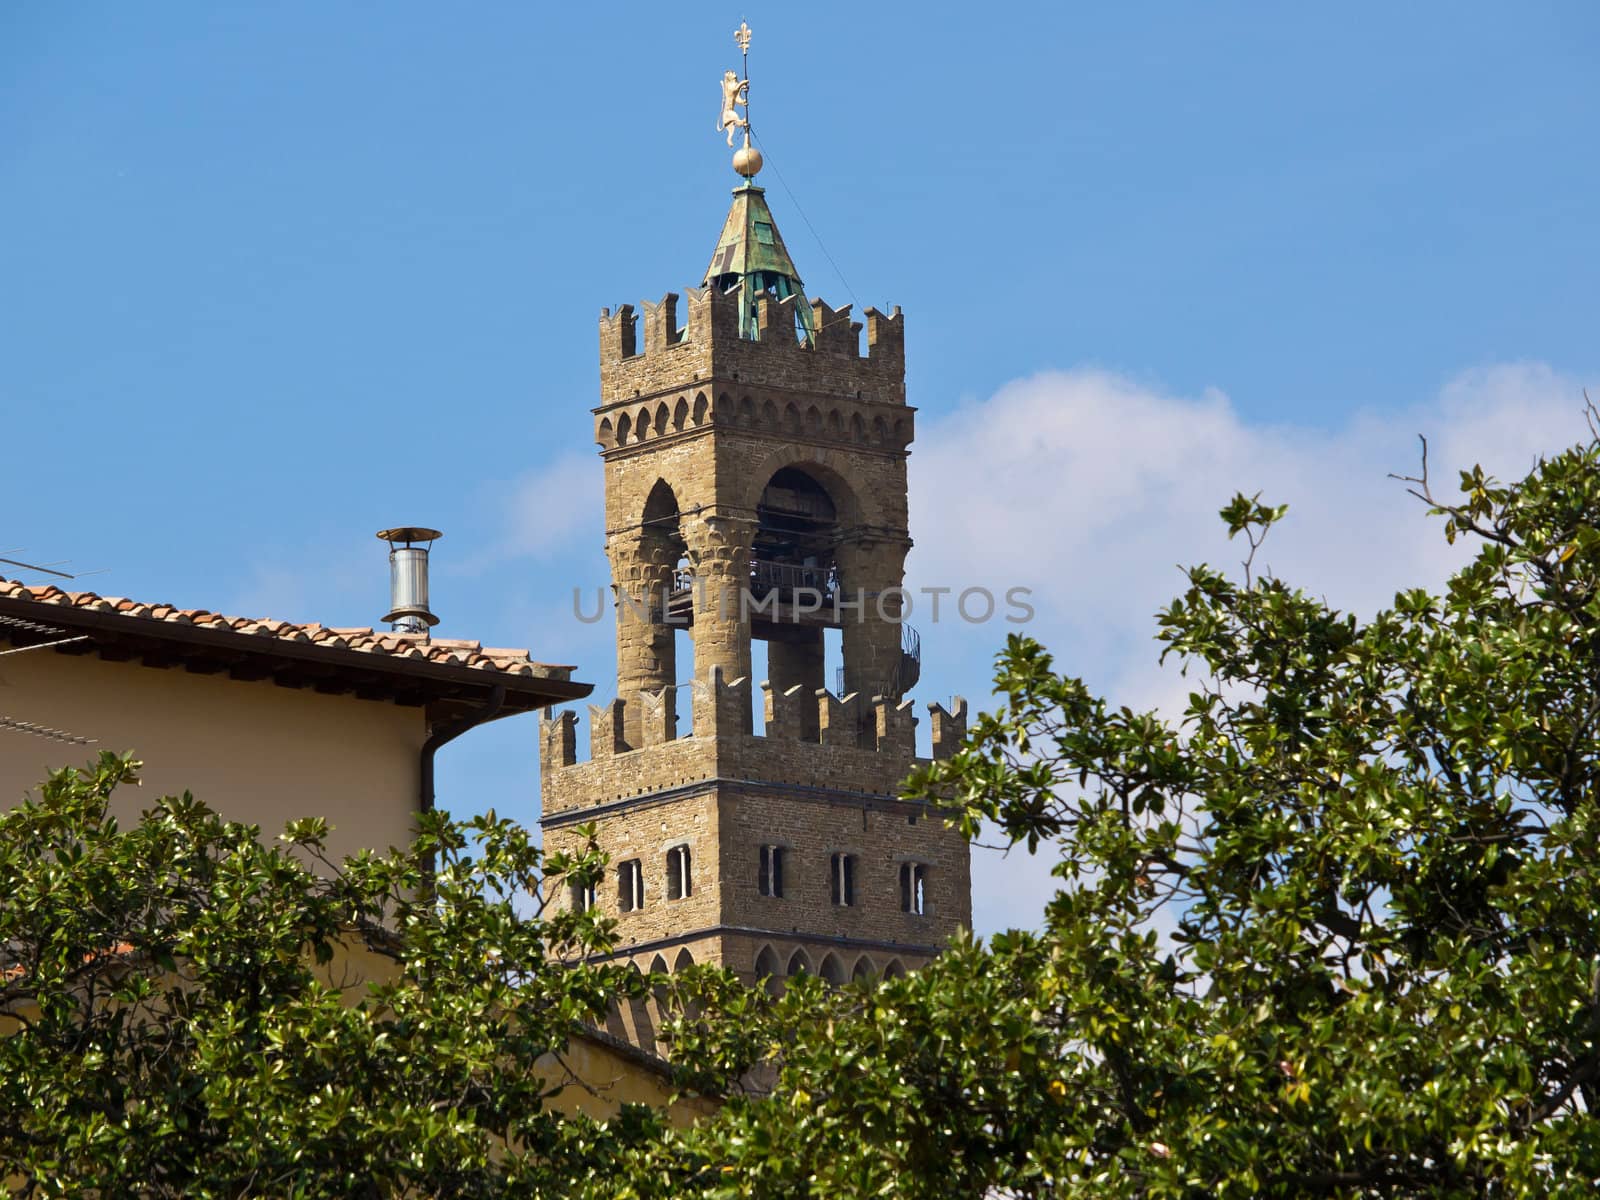 tower of a church in florence italy